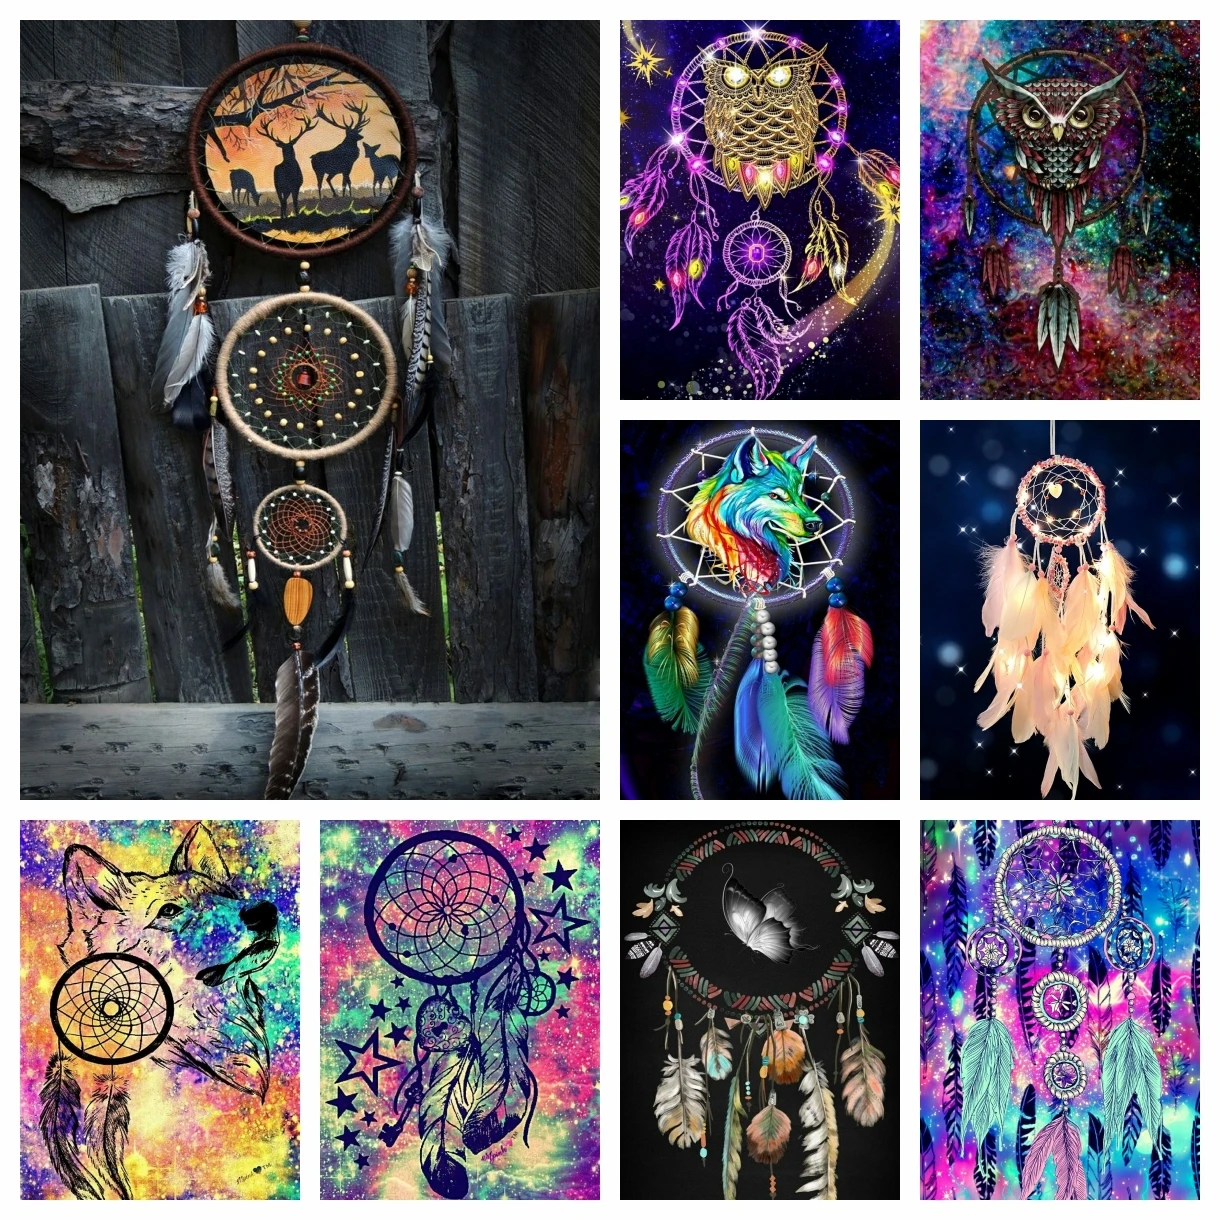 

New Arrival 5D DIY Indians Dream Wind Chime Dream Catcher Diamond Painting Cross Stitch Kit Art Full Drill Embroidery Room Decor